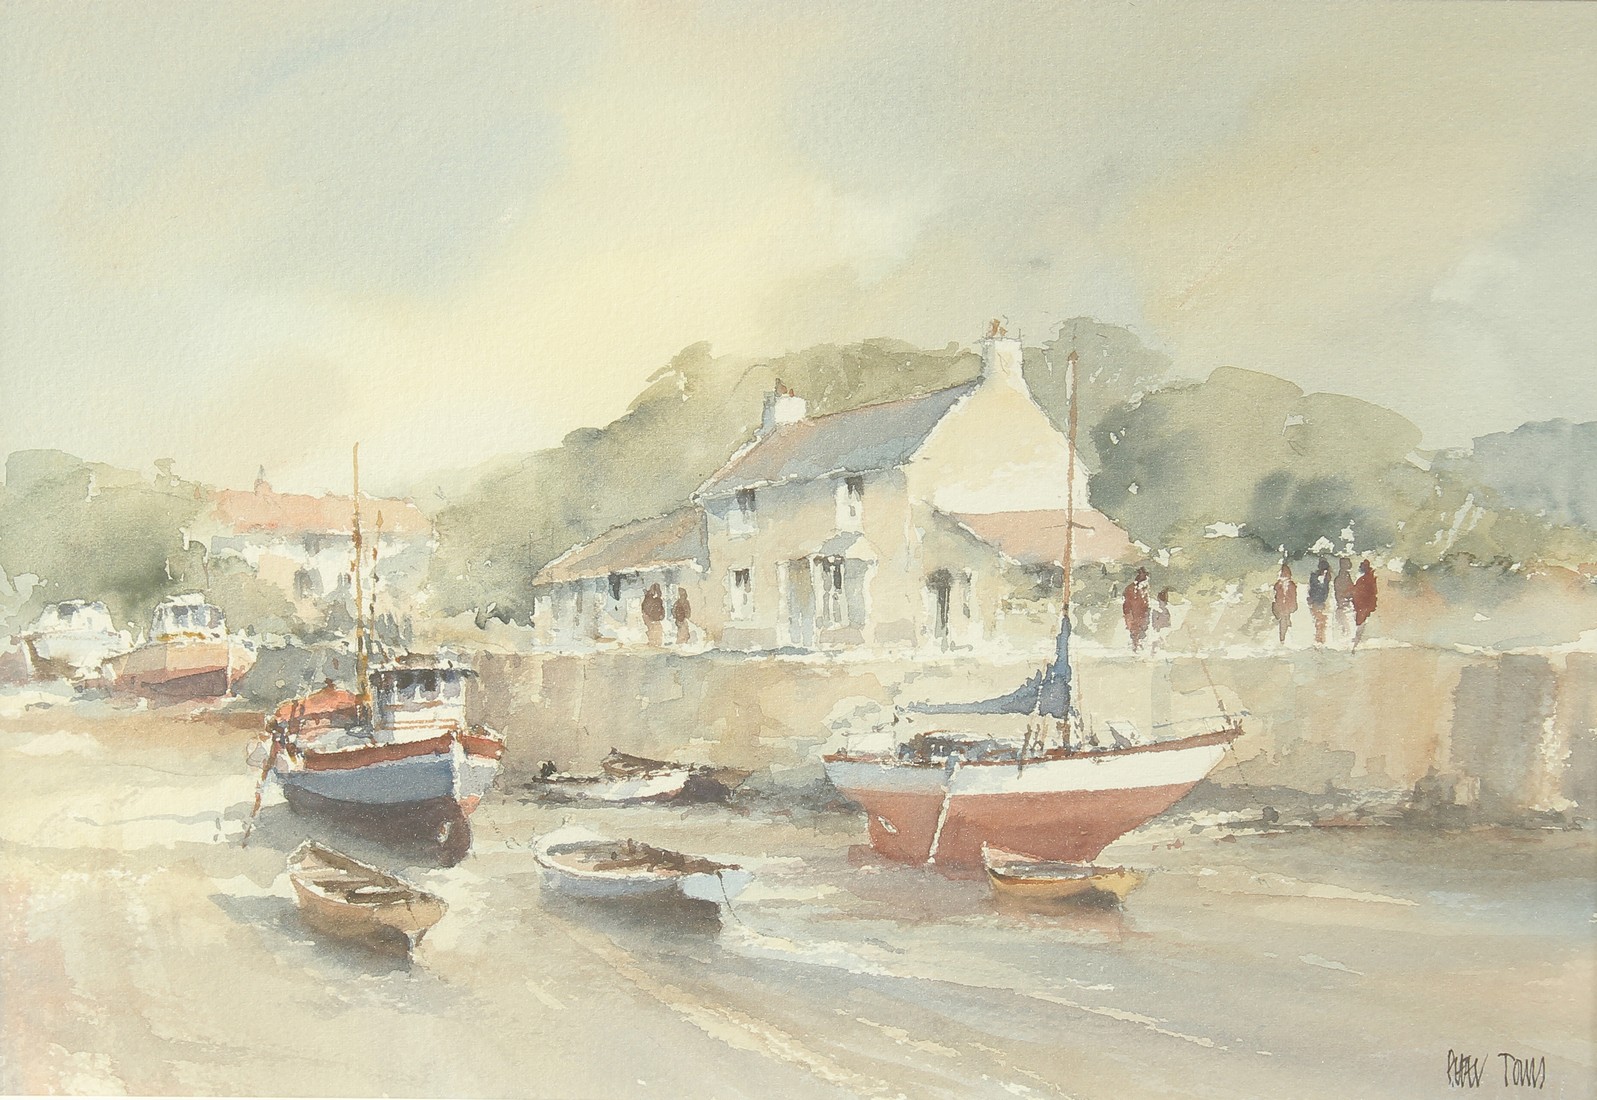 Peter Toms (b. 1940) British, 'Low Tide', watercolour, signed, 9" x 13.5" (23 x 34.5cm). - Image 2 of 4